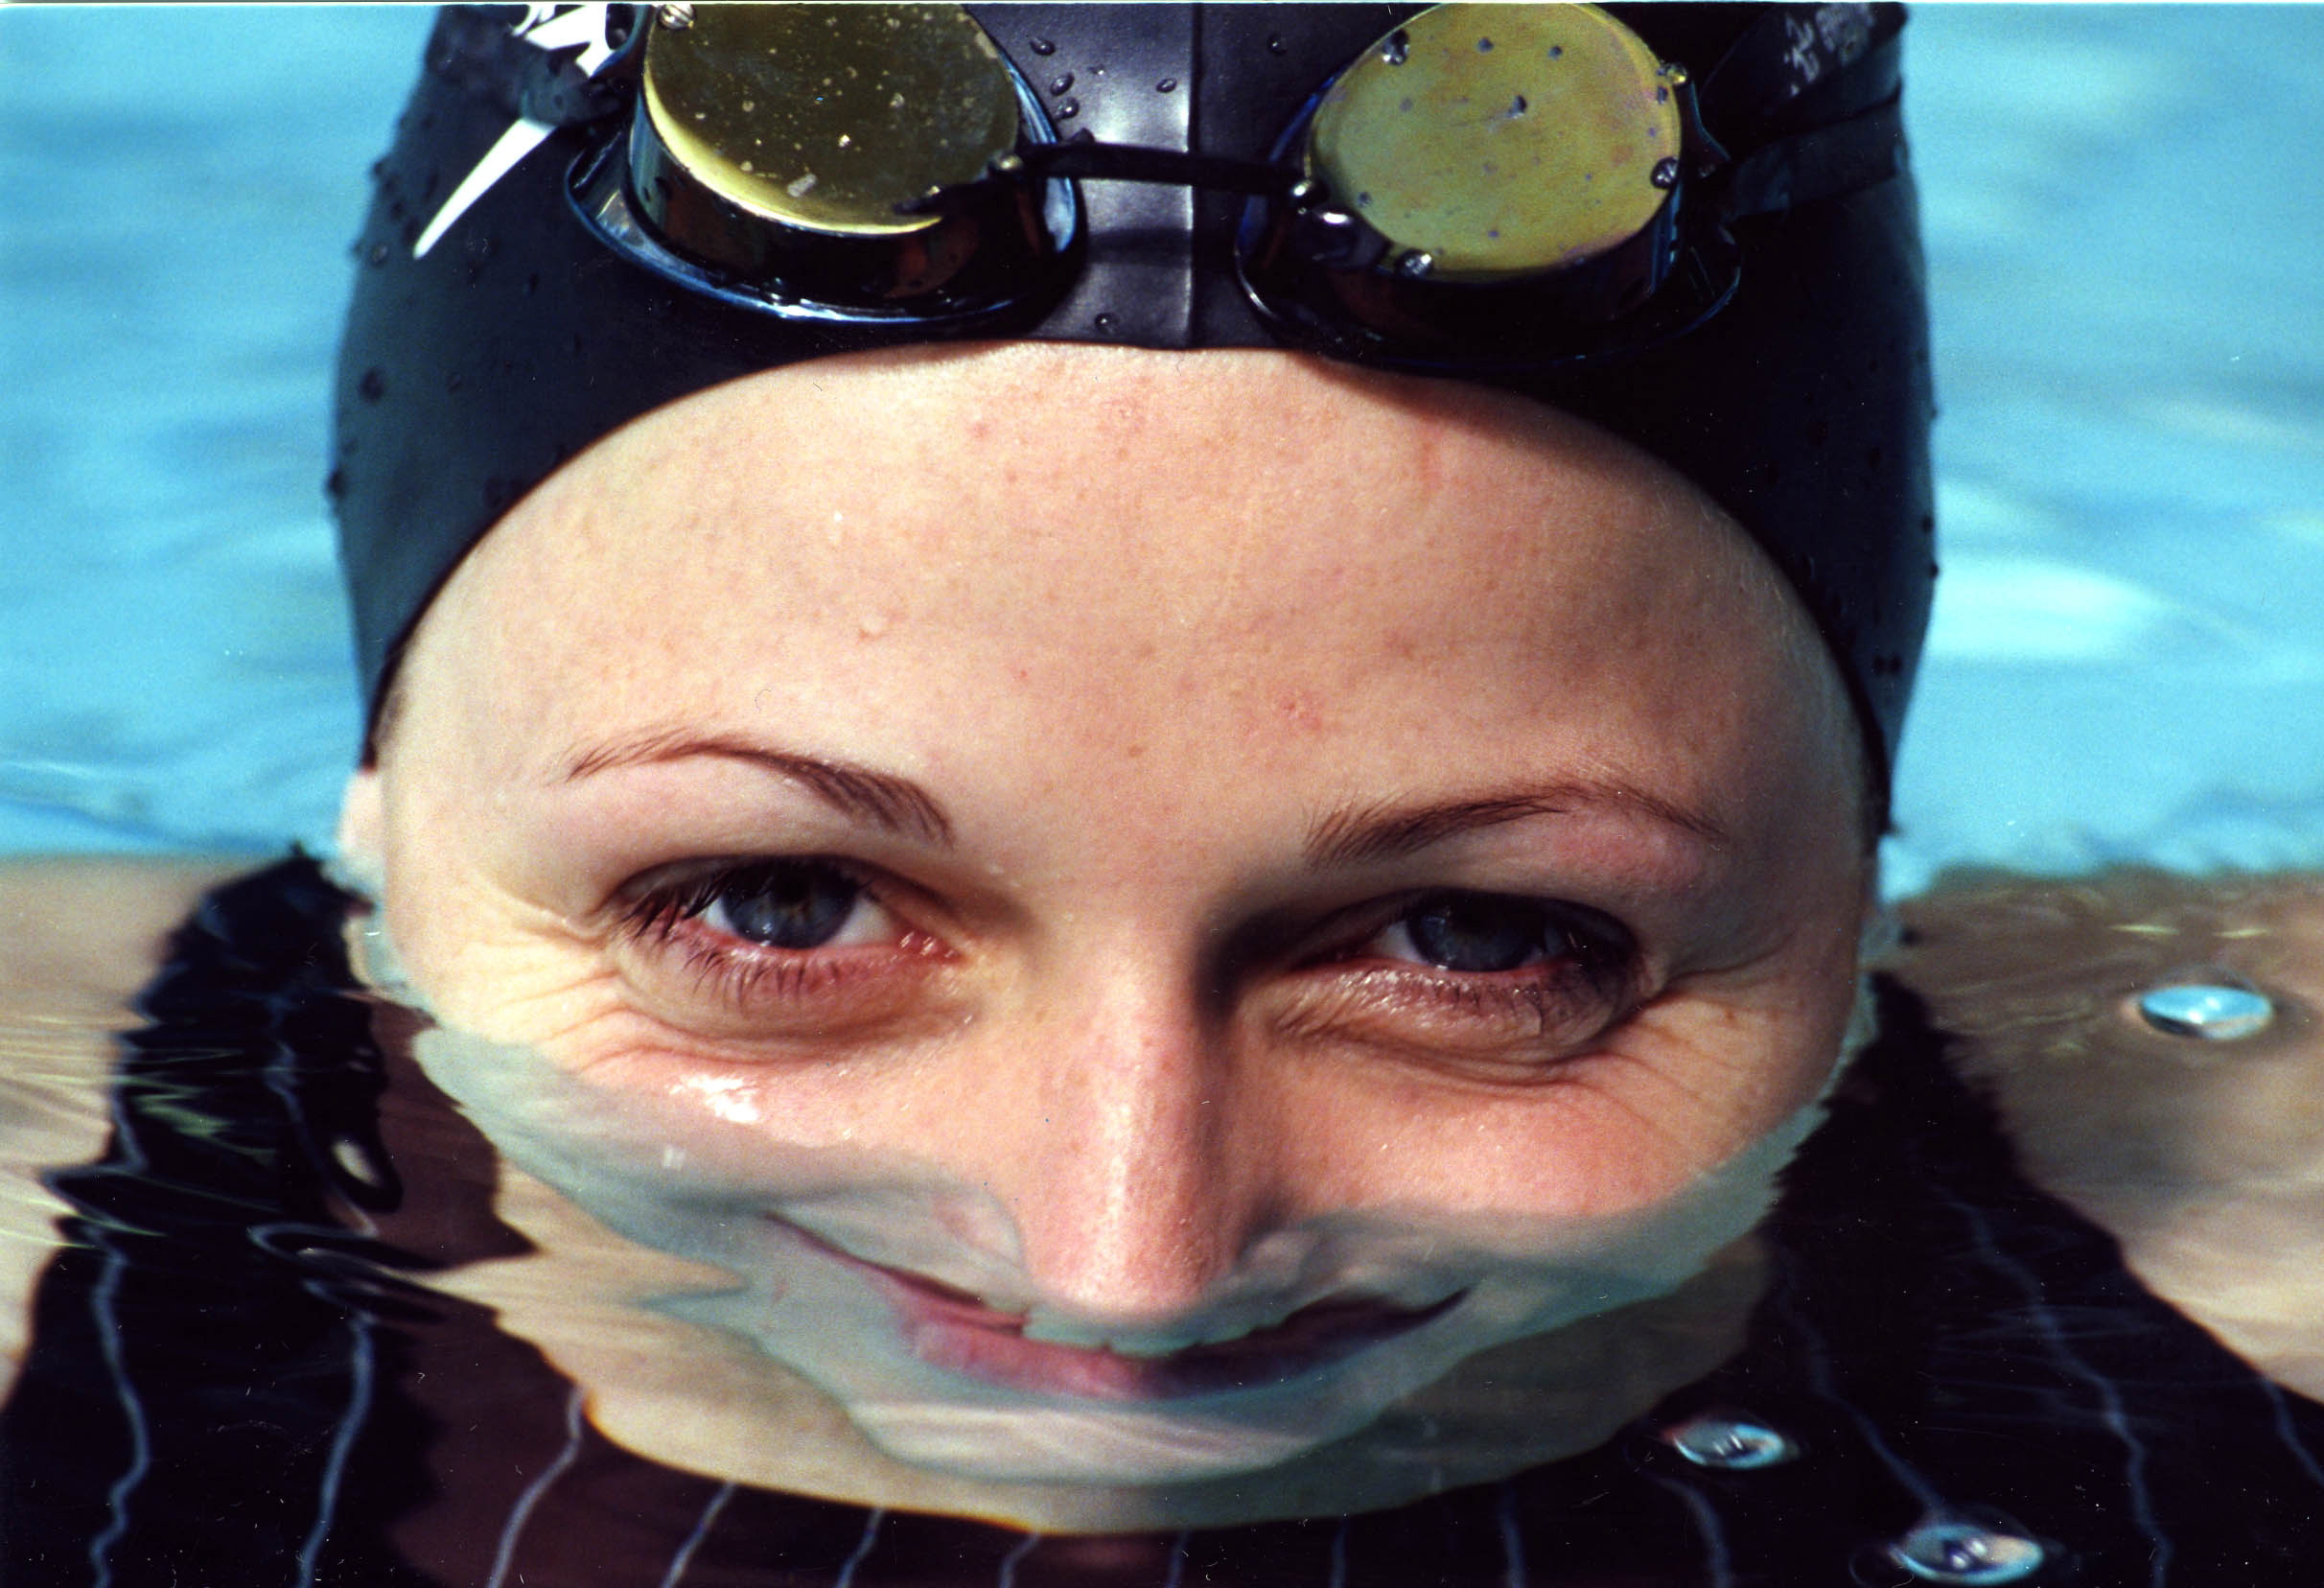 Charlene Wittstock, former Olympic swimmer and current wife of Prince Albert II of Monaco, smiles in a swimming pool on Feb. 10, 1997.